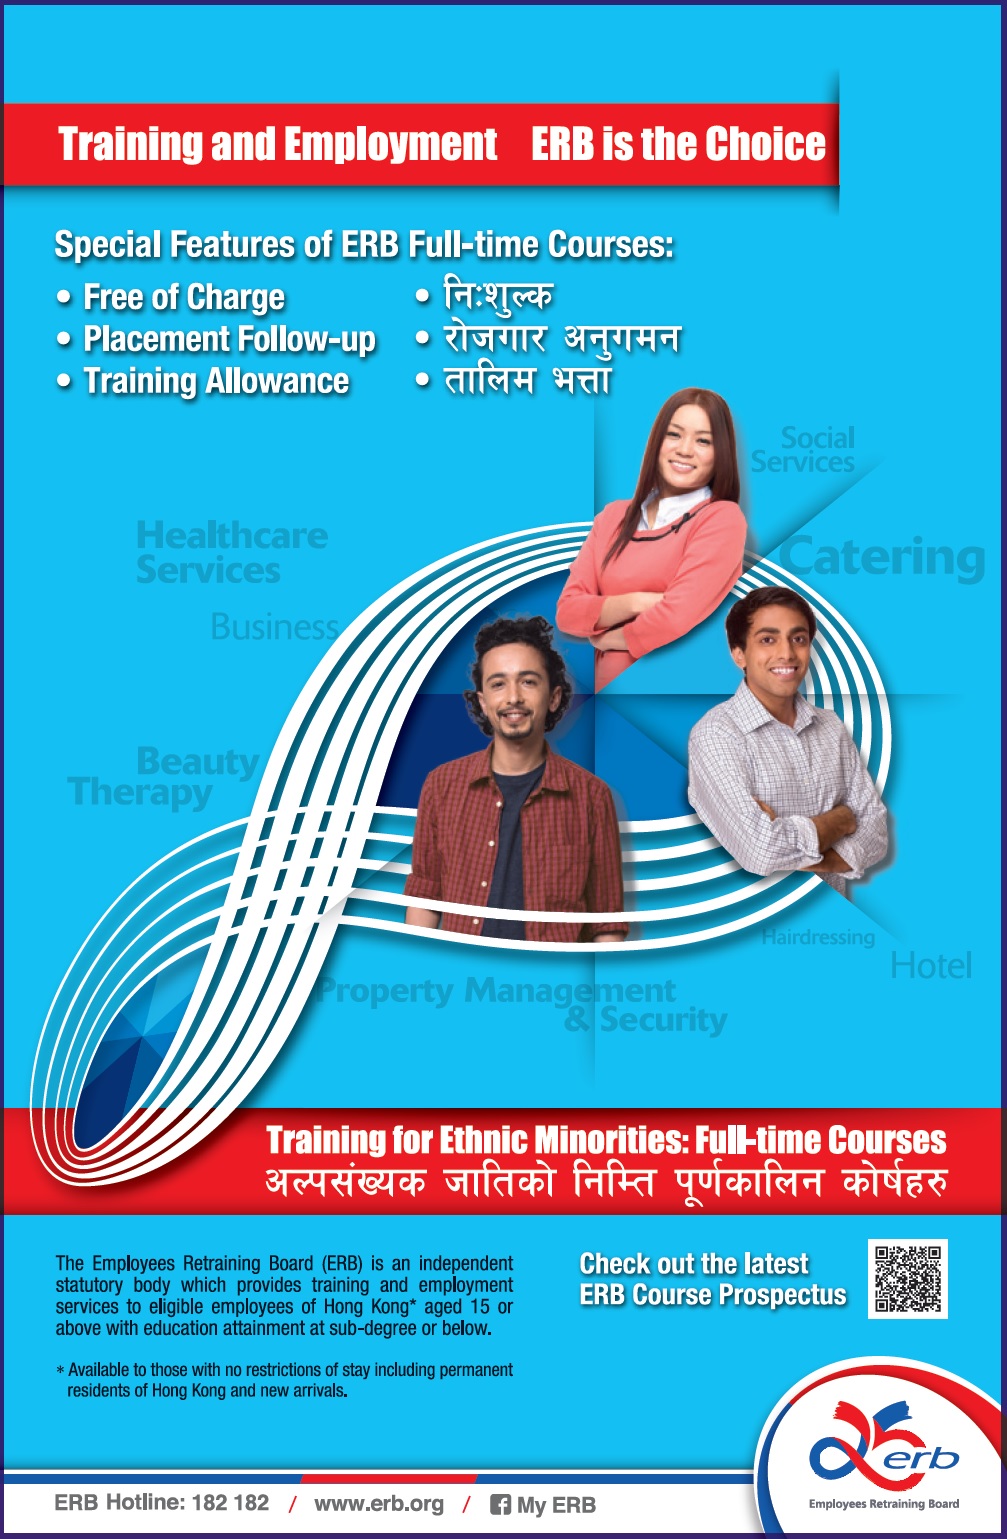 Click here to download the image version of newspaper advertisement of Training for Ethnic Minorities (November 2017) (Nepali)